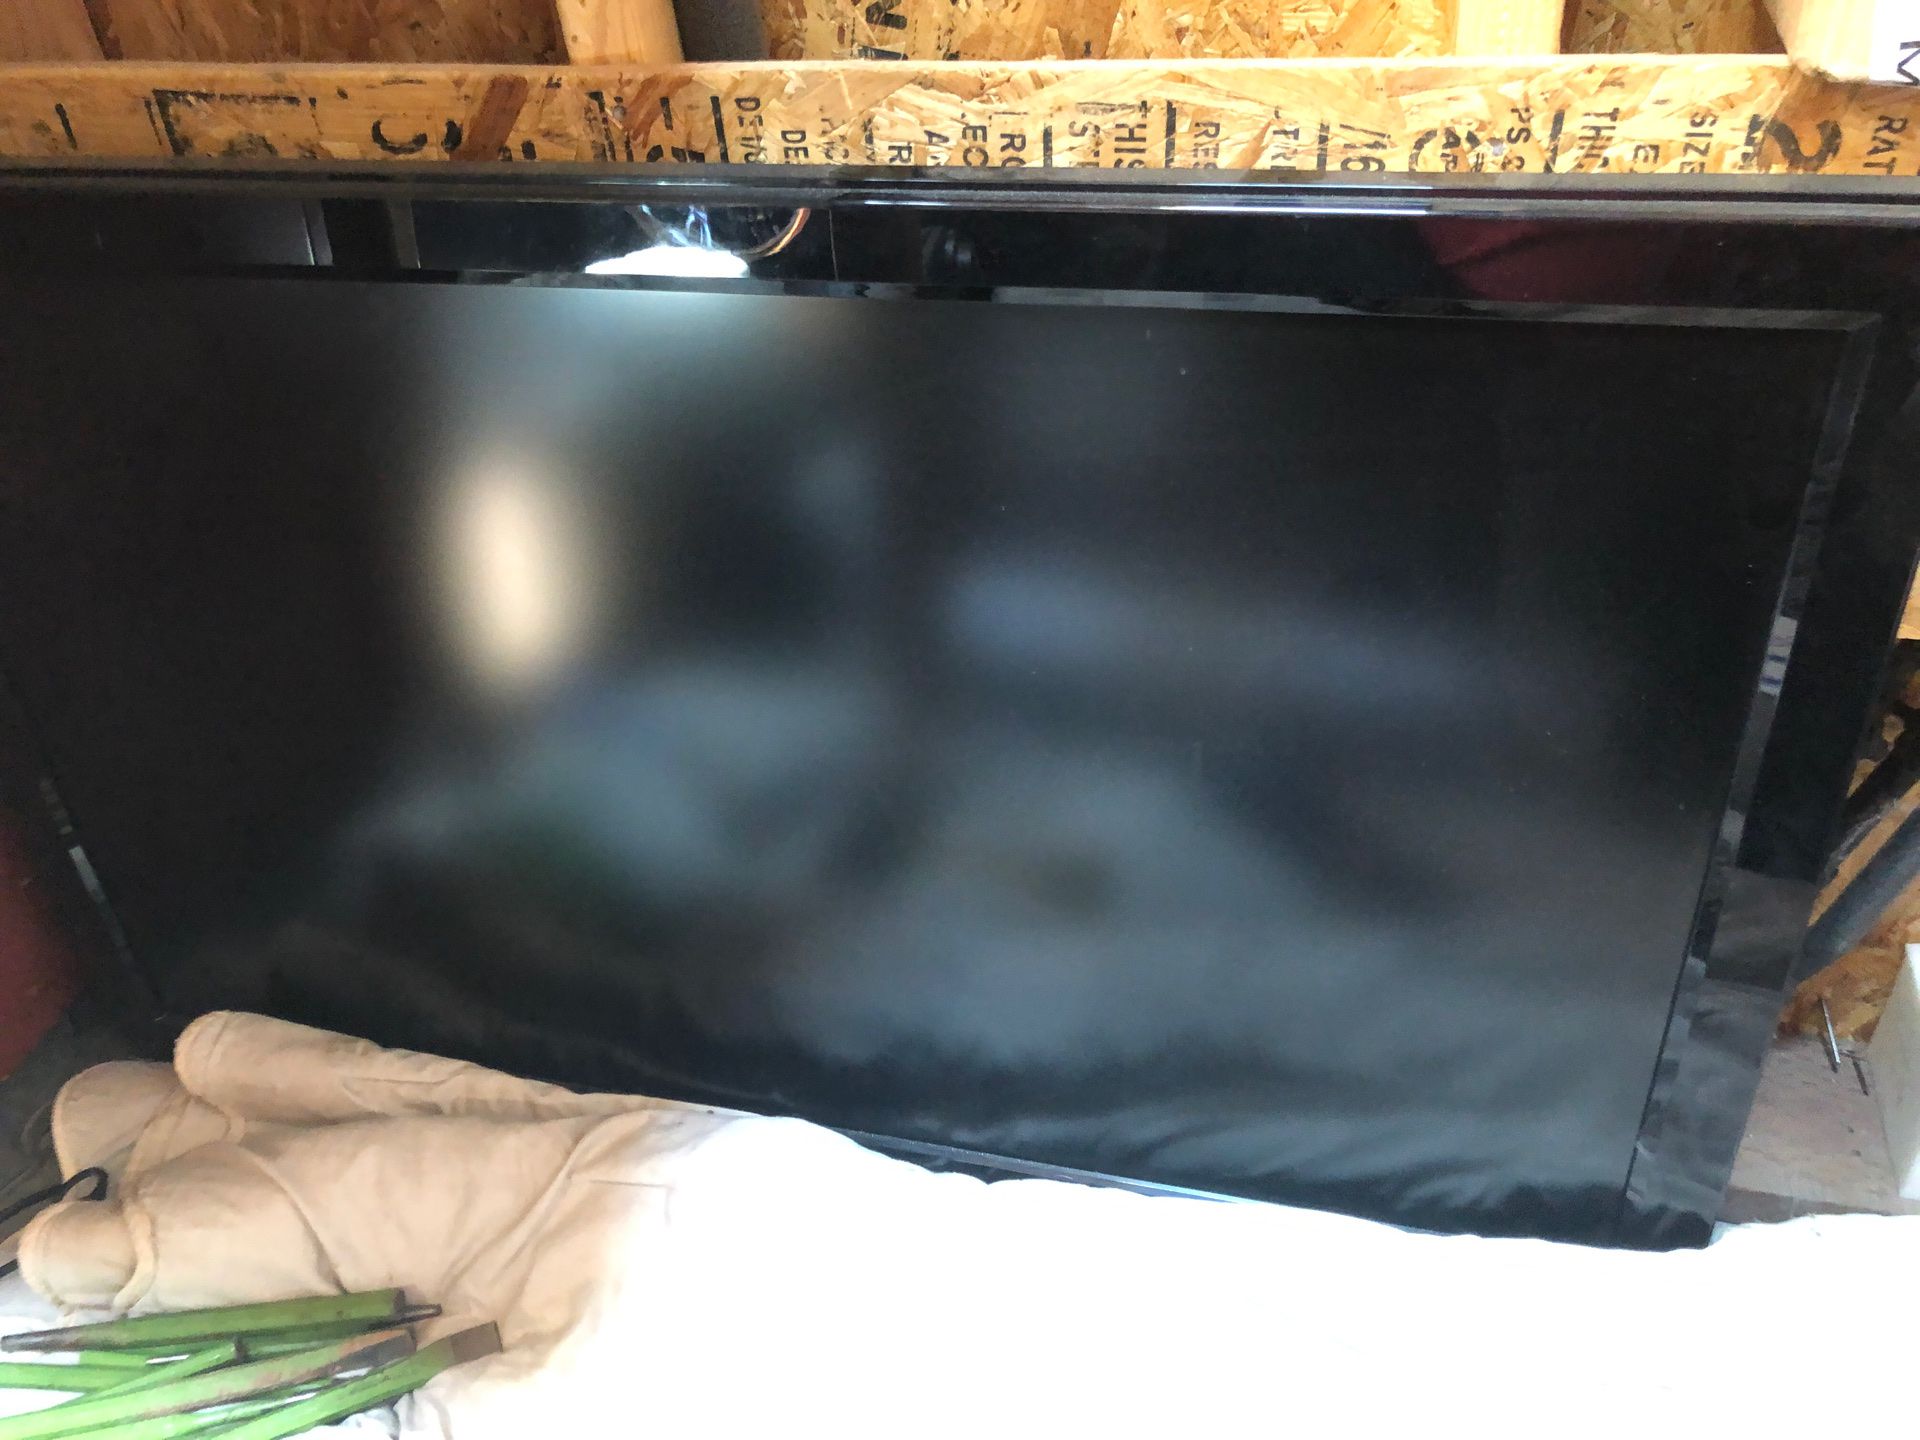 Broken LG TV with remote . Keeps powering off